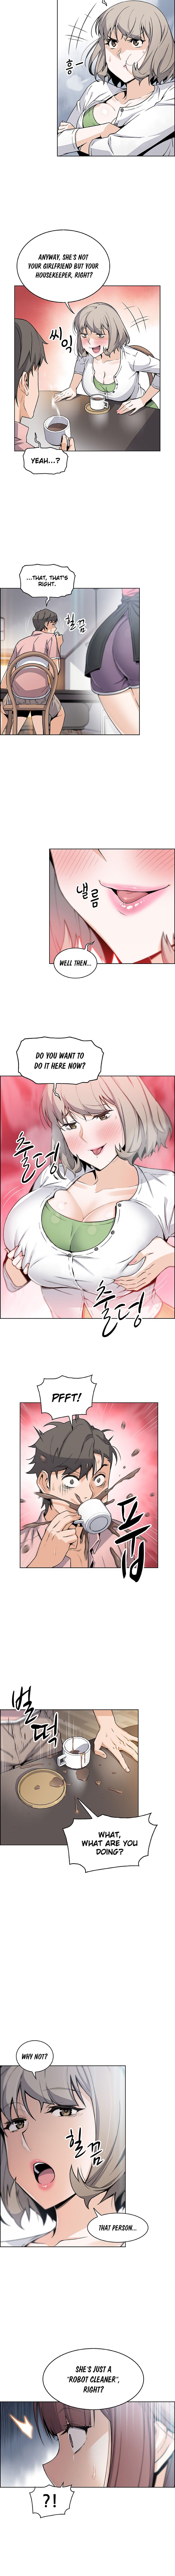 Housekeeper Manhwa - Chapter 31 Page 6